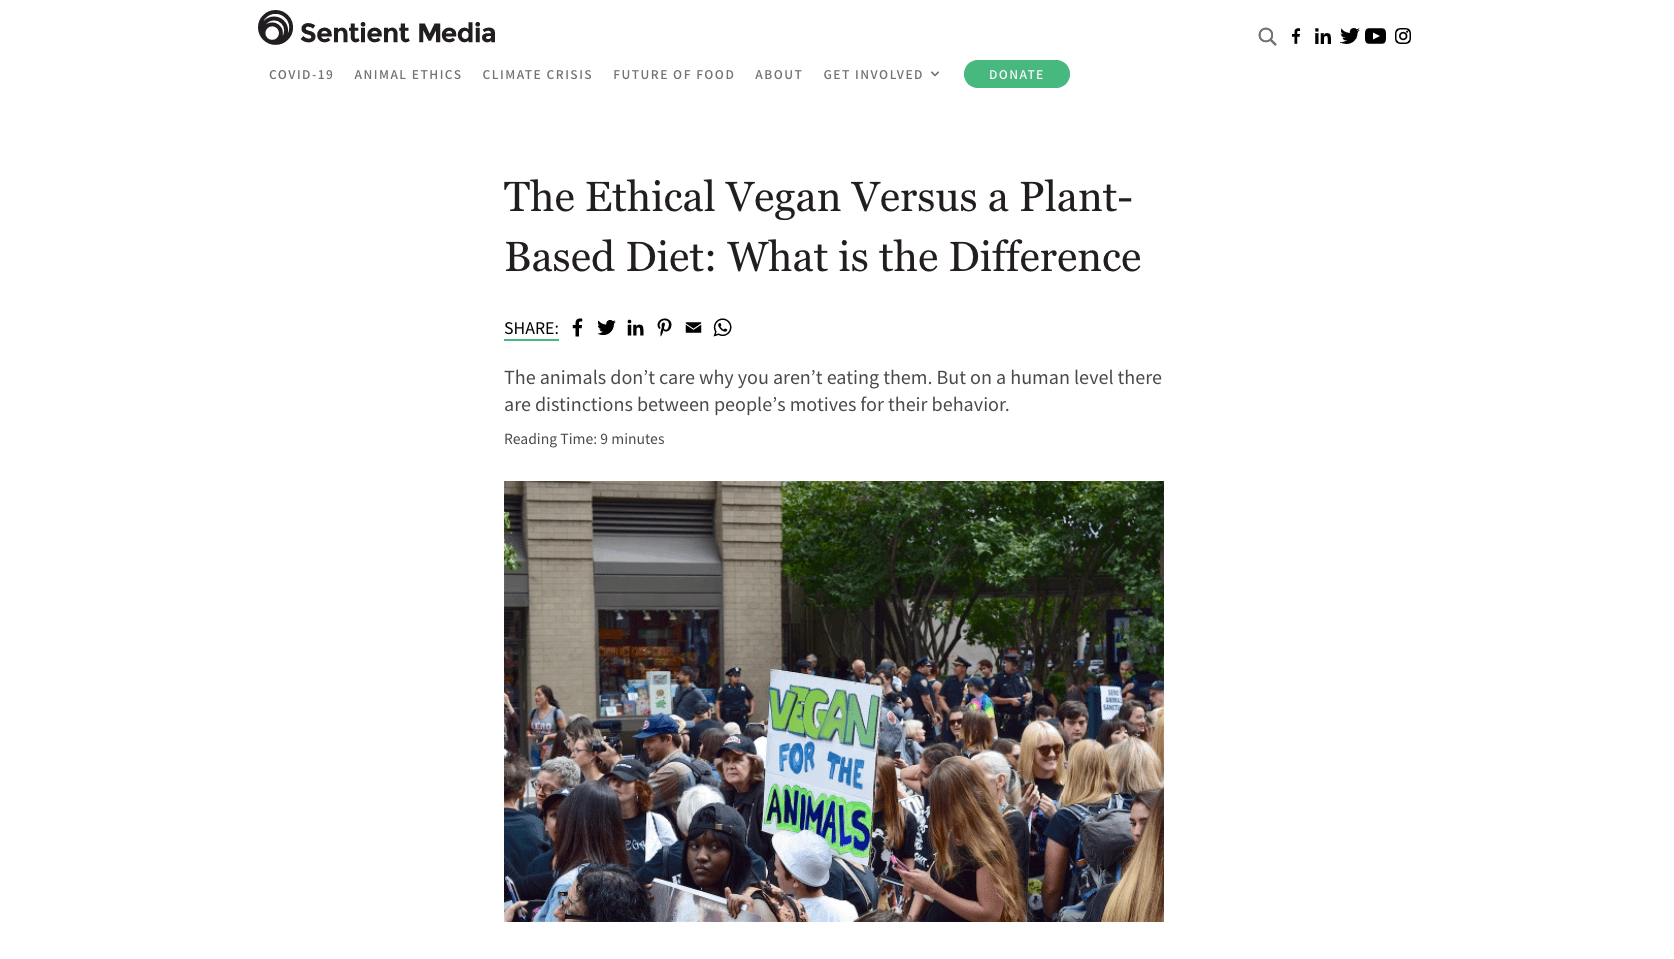 Going vegan? Or plant-based? And what's the difference?